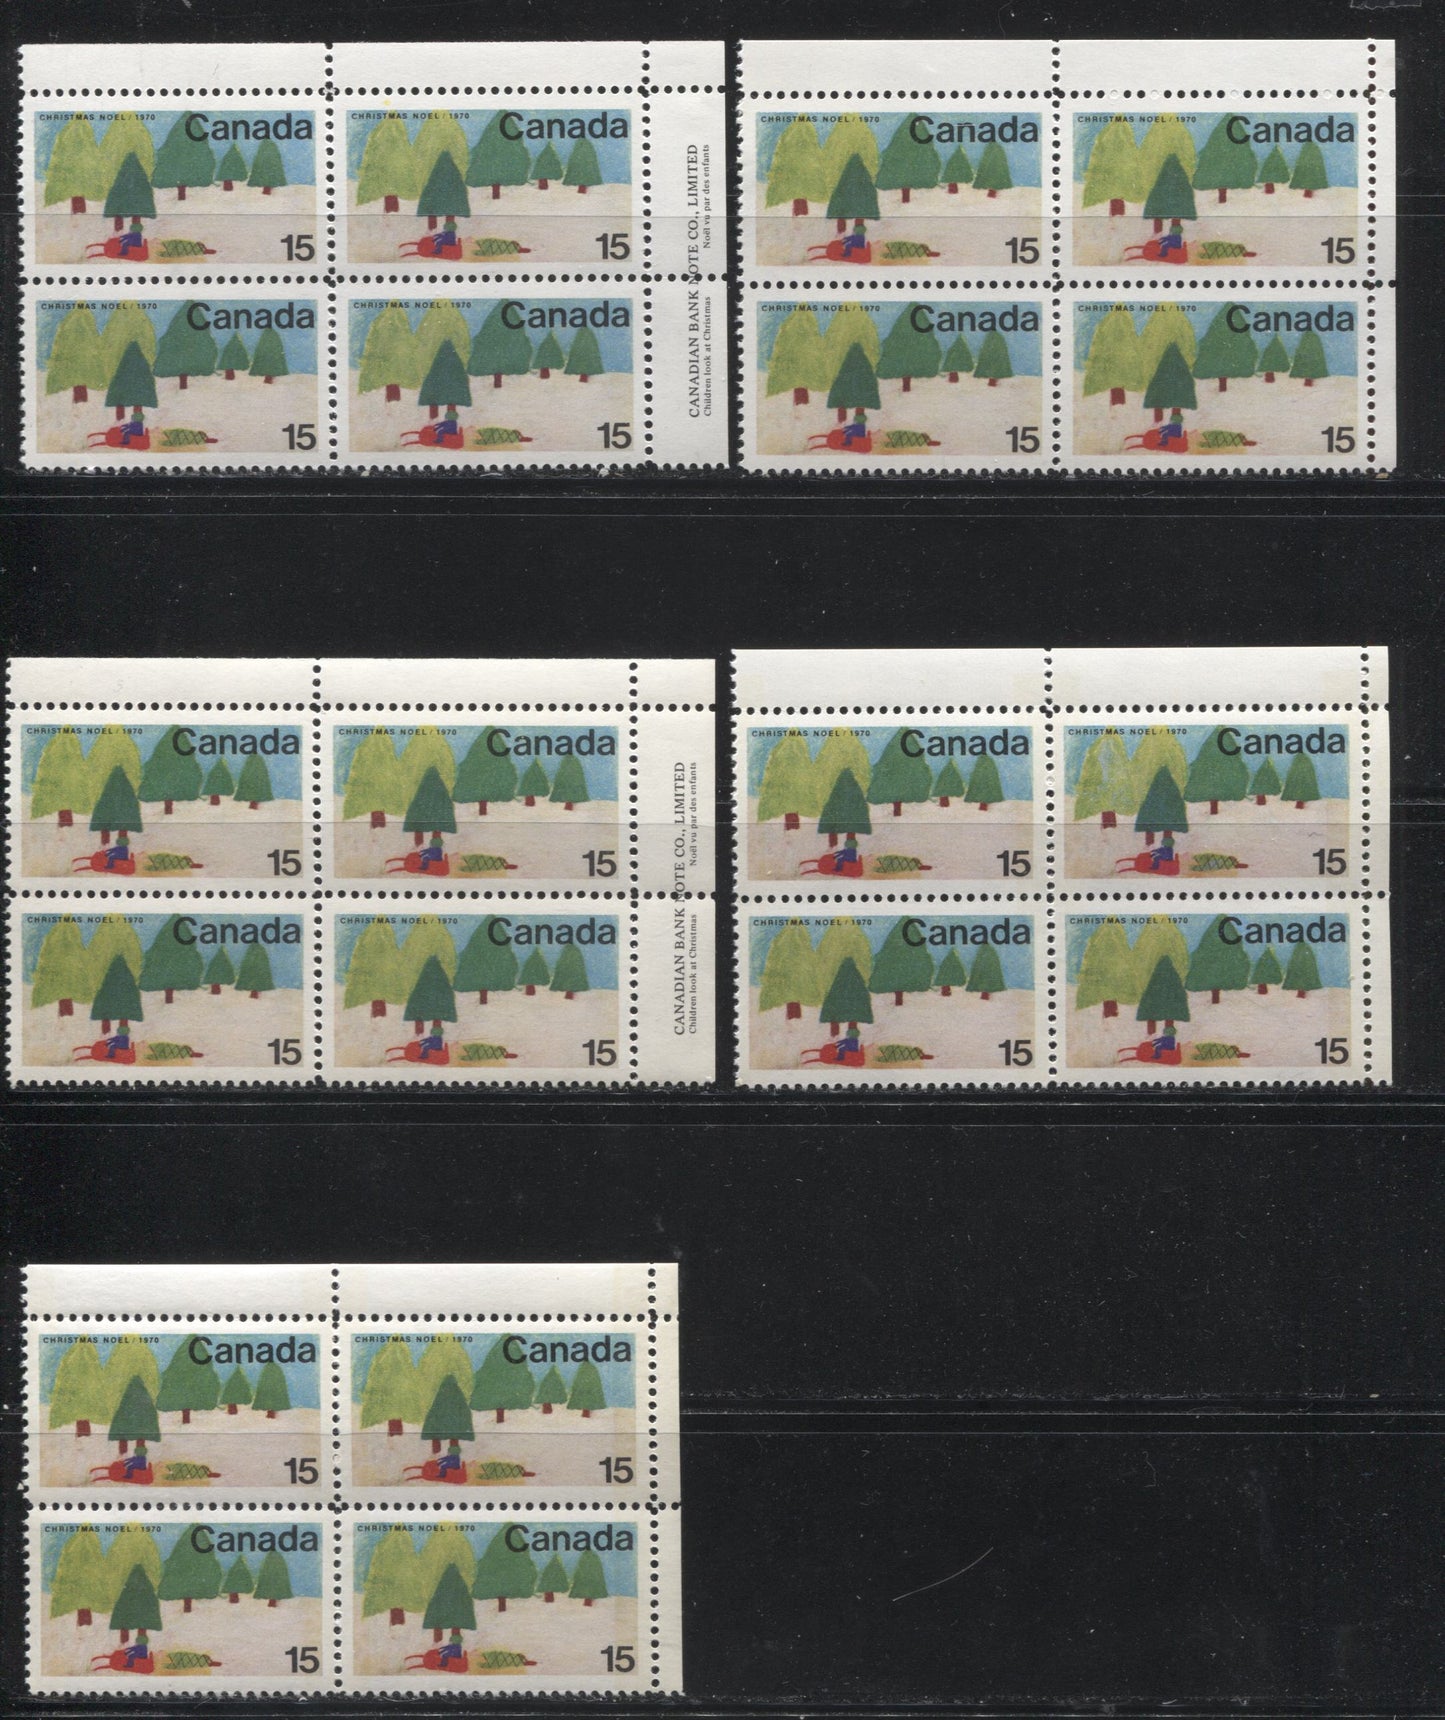 Lot 174 Canada #530-530p 15c Multicoloured Snowmobile, 1970 Christmas Issue, Five VFNH Untagged and Winnipeg Tagged Upper Right Inscription and Field Stock Blocks of 4 on Ribbed HB 11 and HB12 Papers, Various Perfs